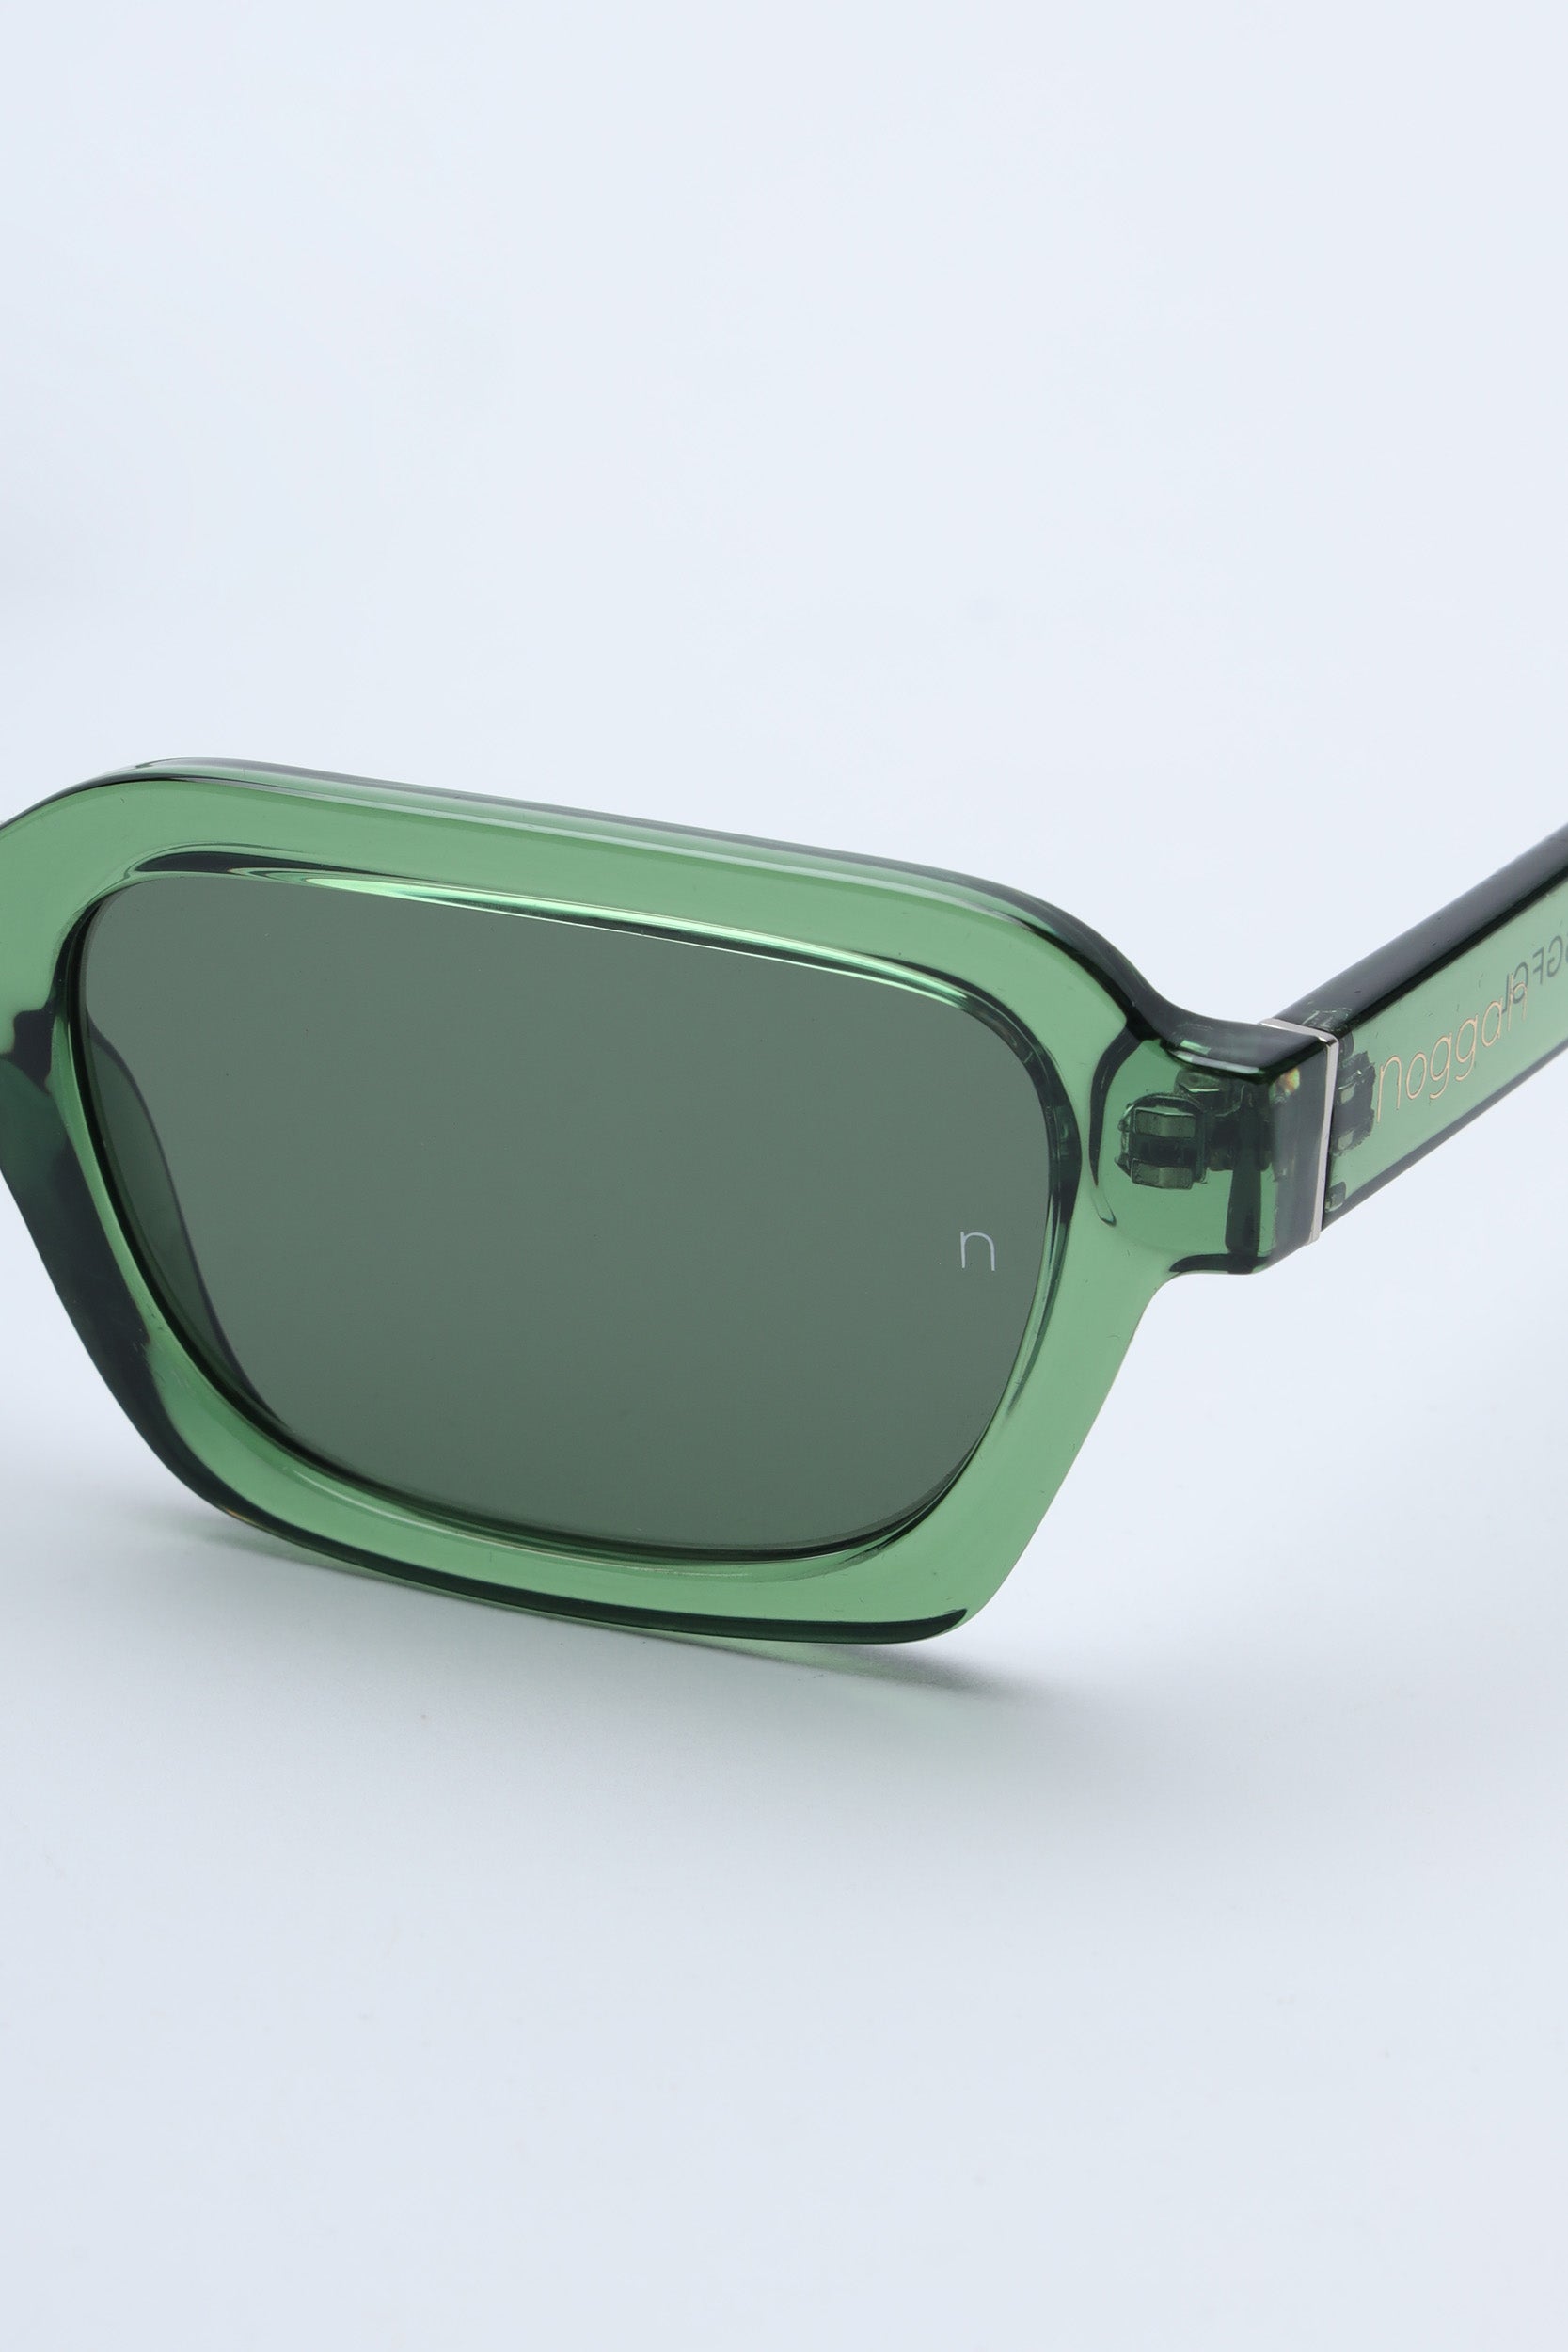 NS1002YFGL PC Brown Frame with Green Glass Lens Sunglasses